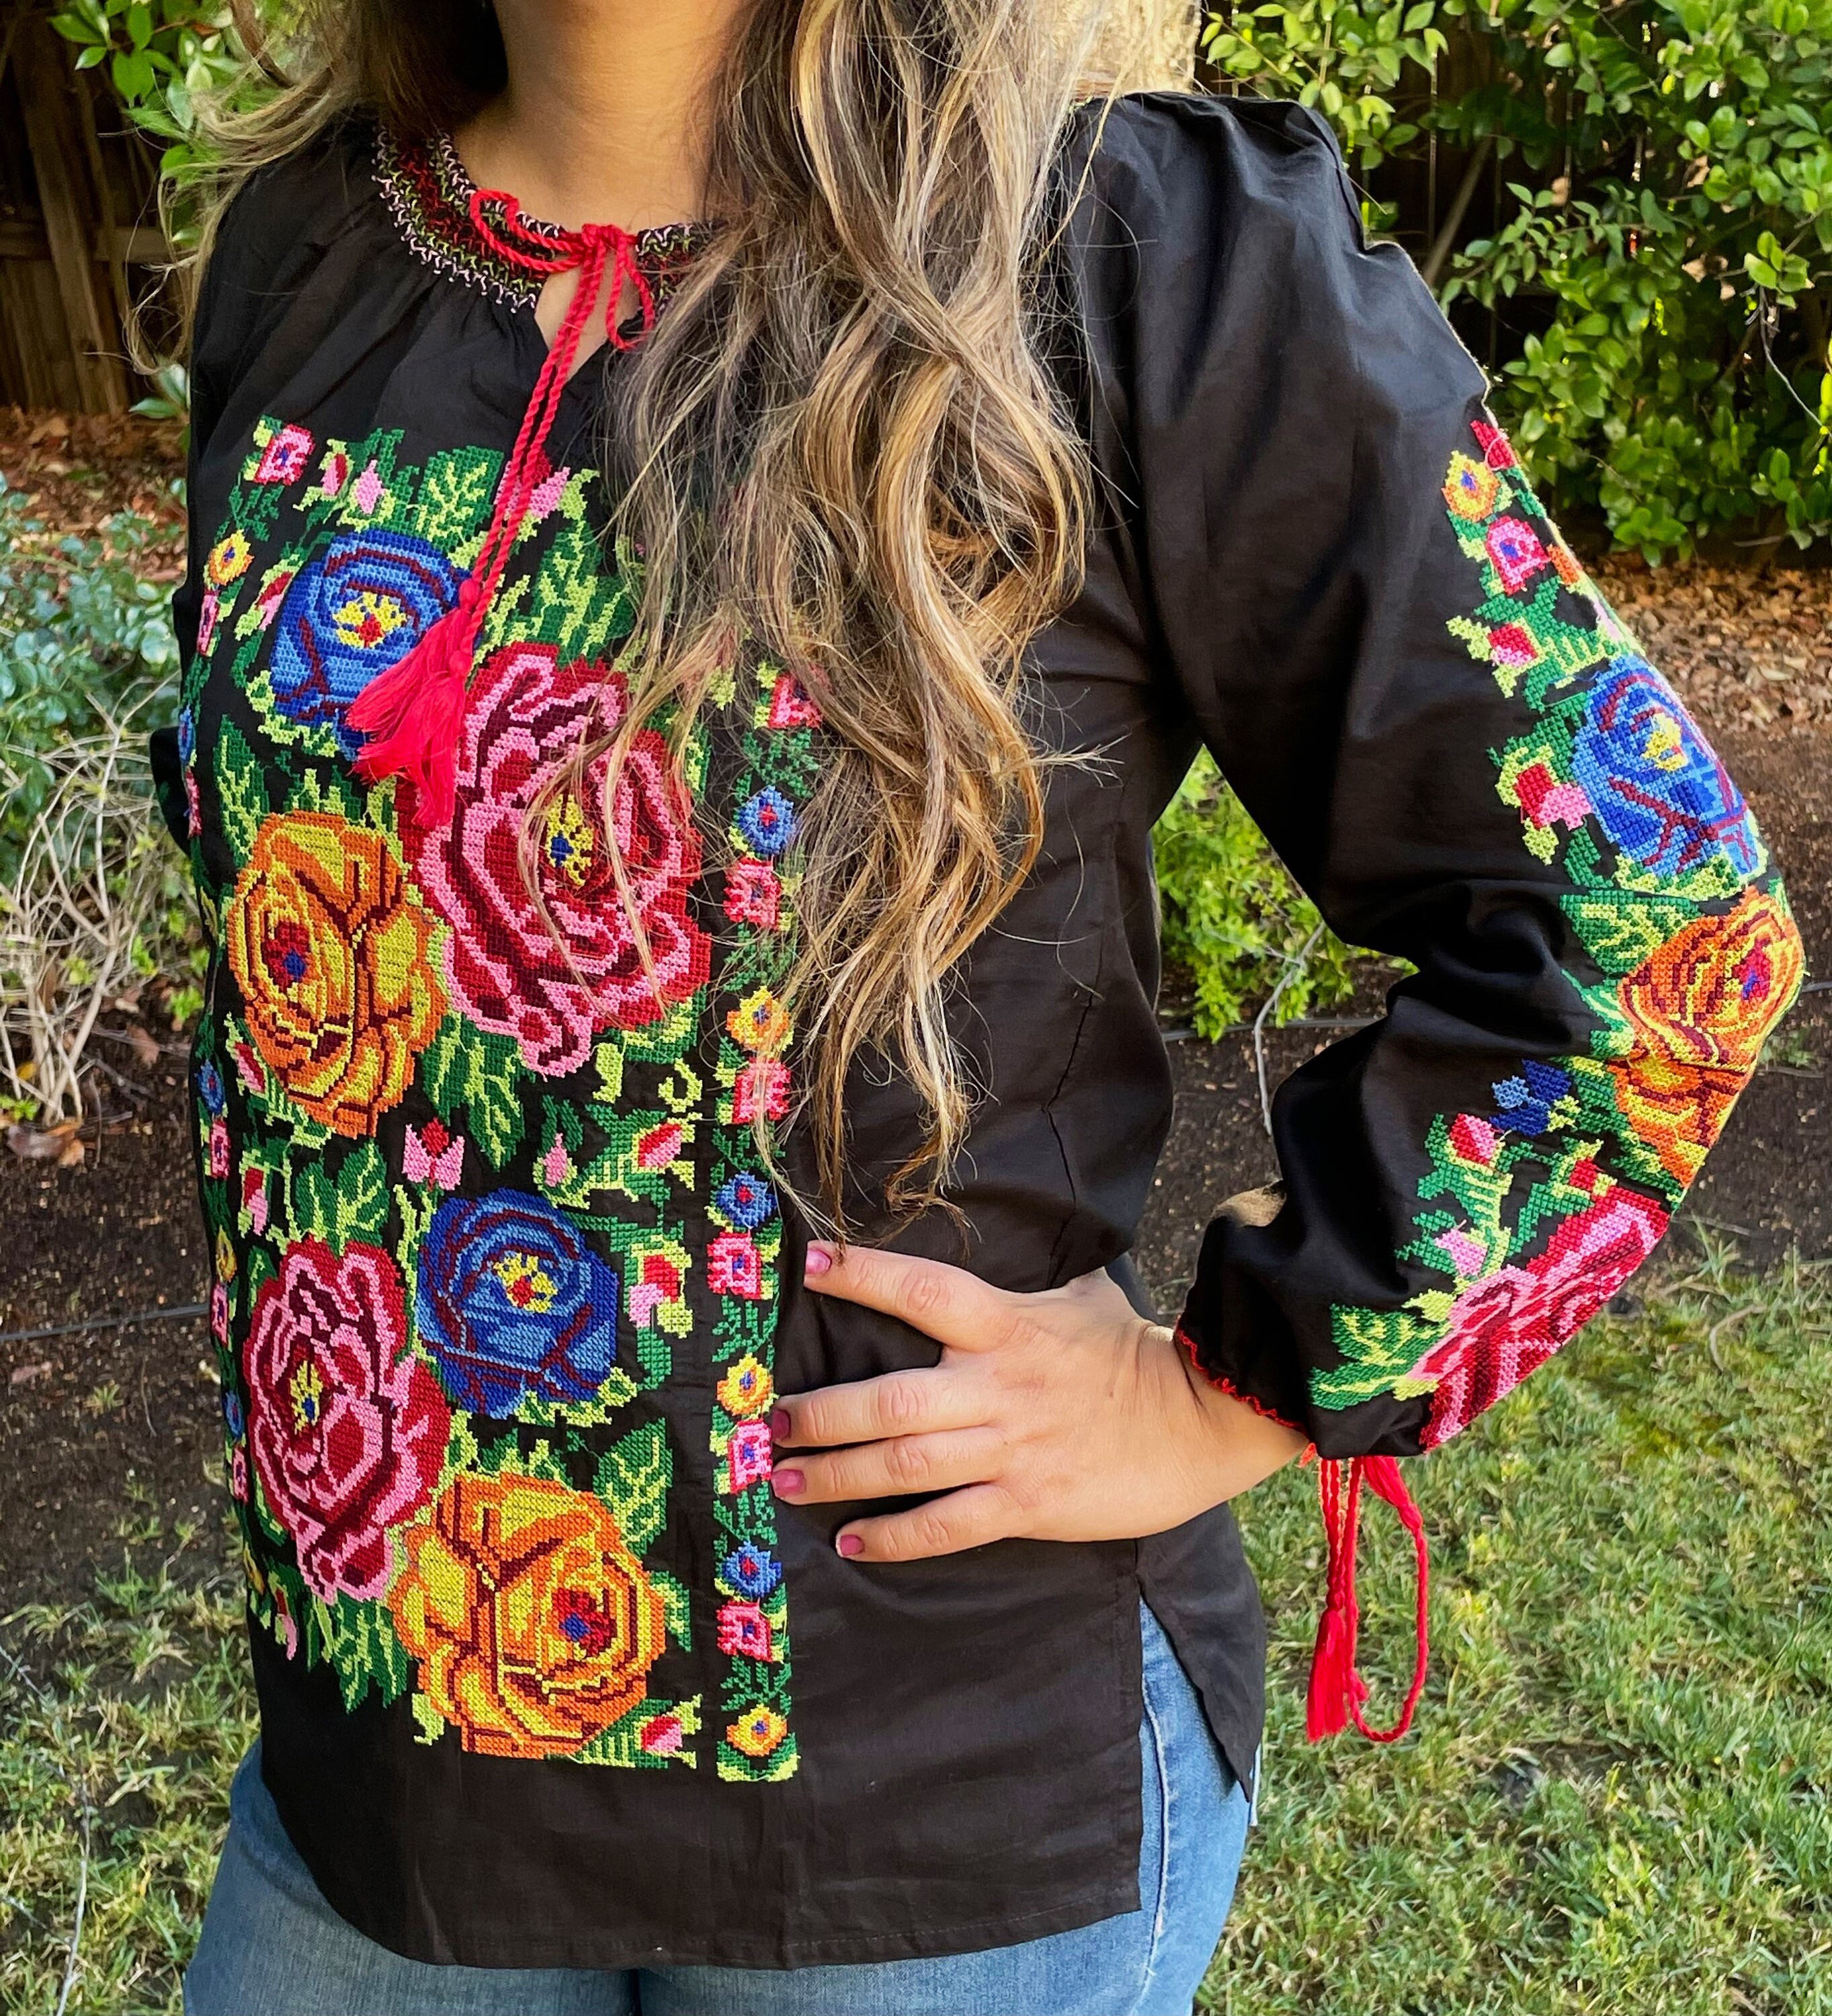 Dressy Handmade Traditional Party Shirts for Plus Size Super Bohemian Mexican Floral Embroidered Blouses for Women 